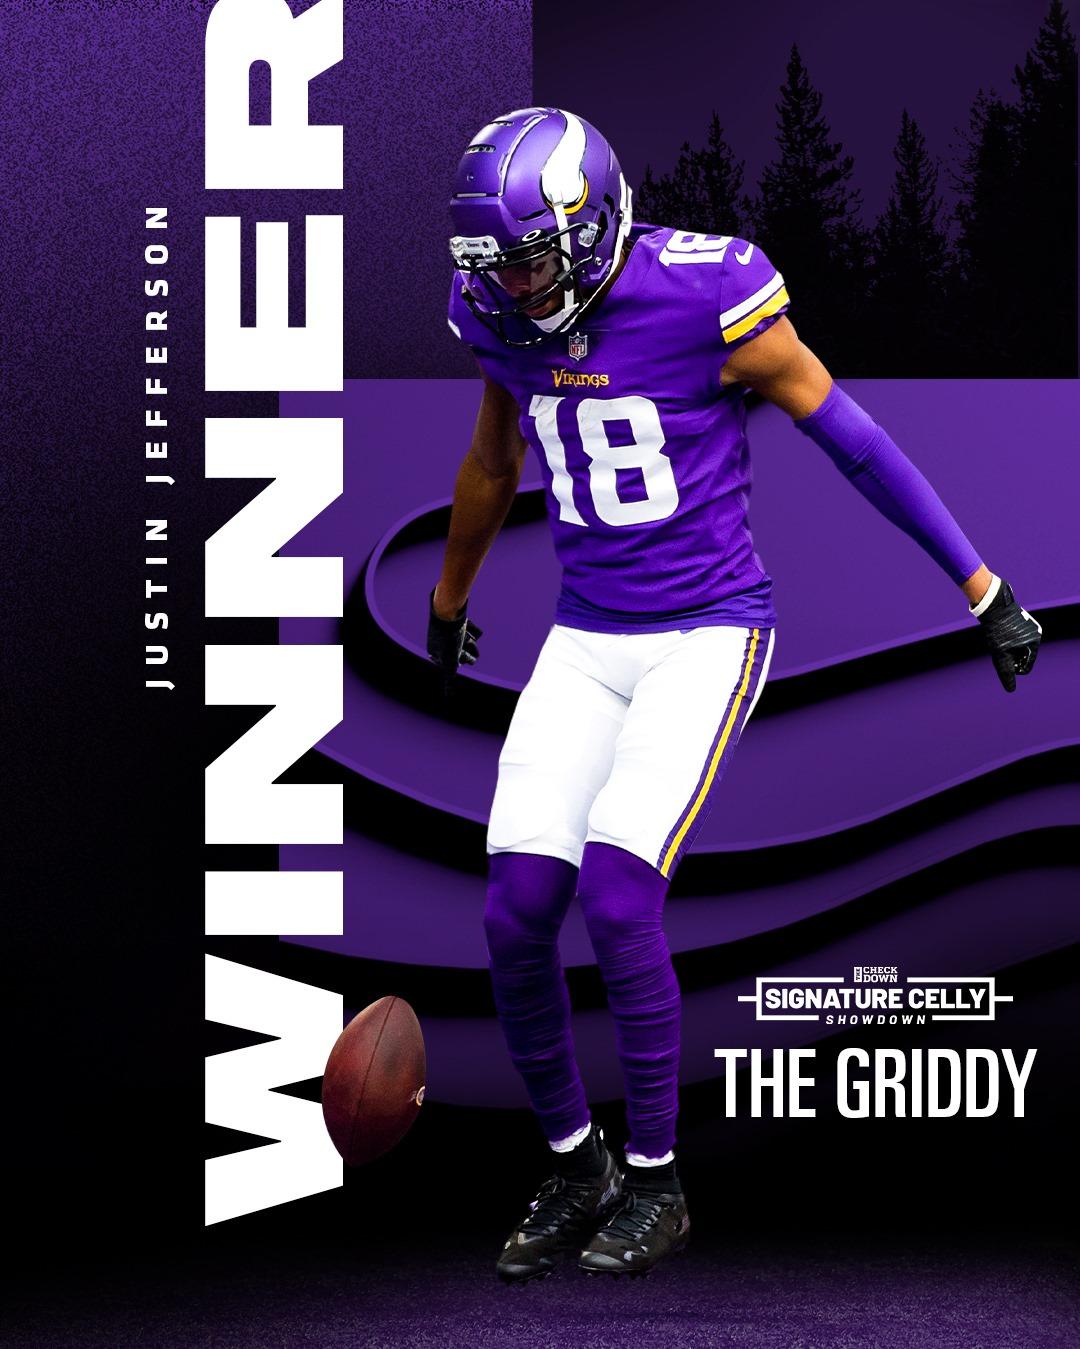 Minnesota Vikings   Griddy undefeated httpsmnvkngs2Thg0Dl